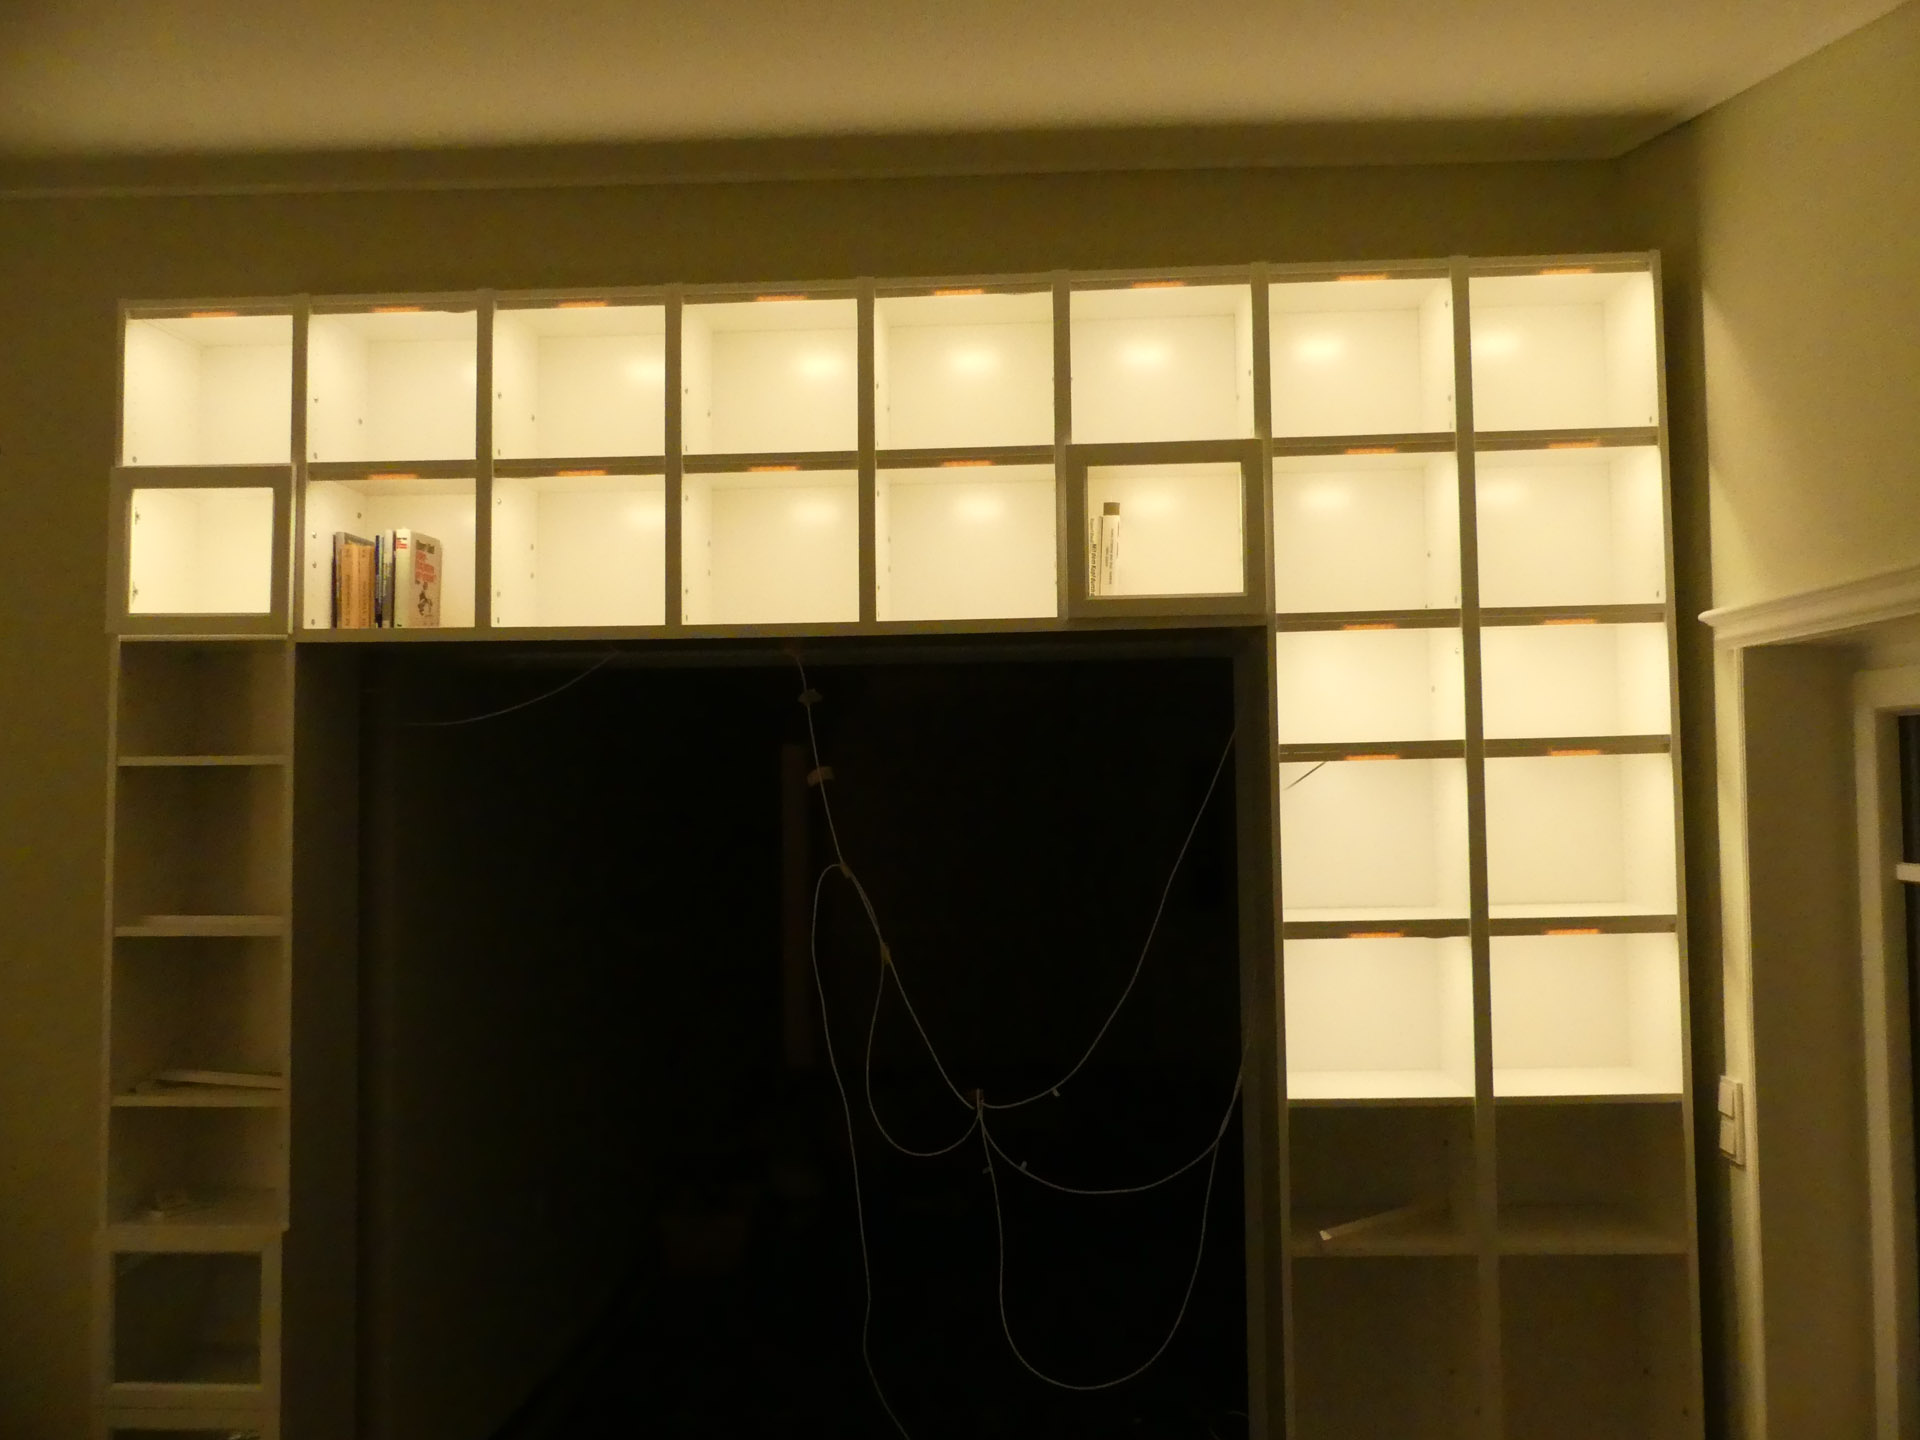 Step 4 Installing Led Lighting The, Lighting On Top Of Bookcase Ikea